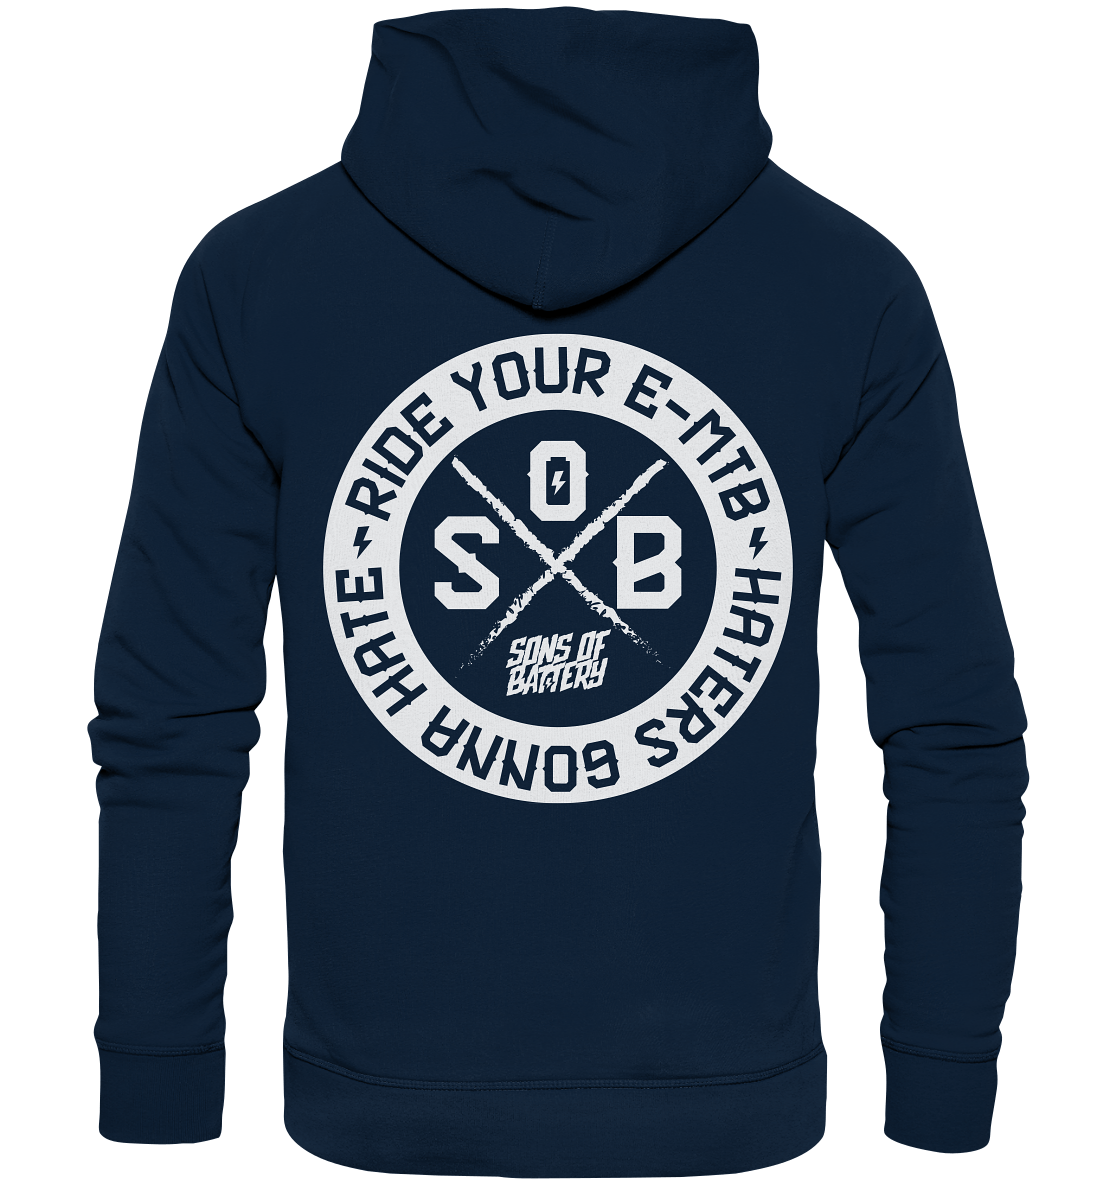 Sons of Battery® - E-MTB Brand & Community Hoodies French Navy / XS Haters gonna Hate - Organic Fashion Hoodie (Flip Label) E-Bike-Community